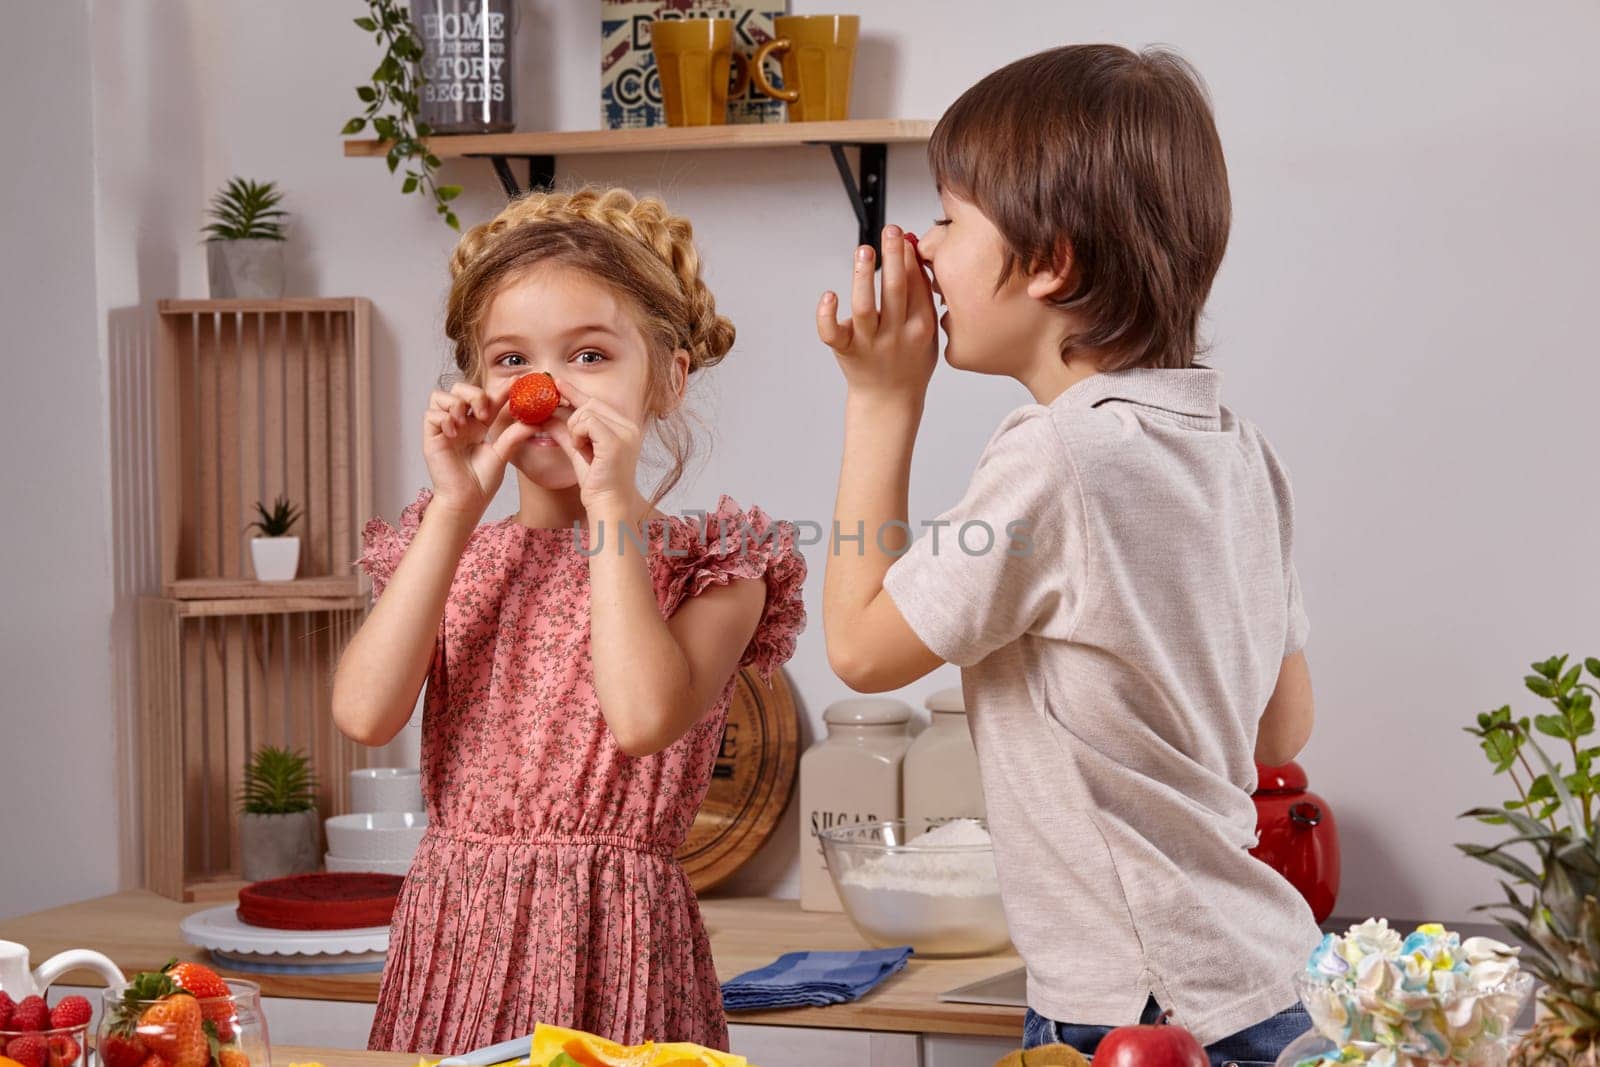 Cute cook couple. Brunette boy dressed in a light t-shirt and jeans with a little blond girl dressed in a pink dress with a braid in her hairstyle are smiling at a kitchen against a white wall with shelves on it. They are holding a strawberry as if it were their noses and laughing.